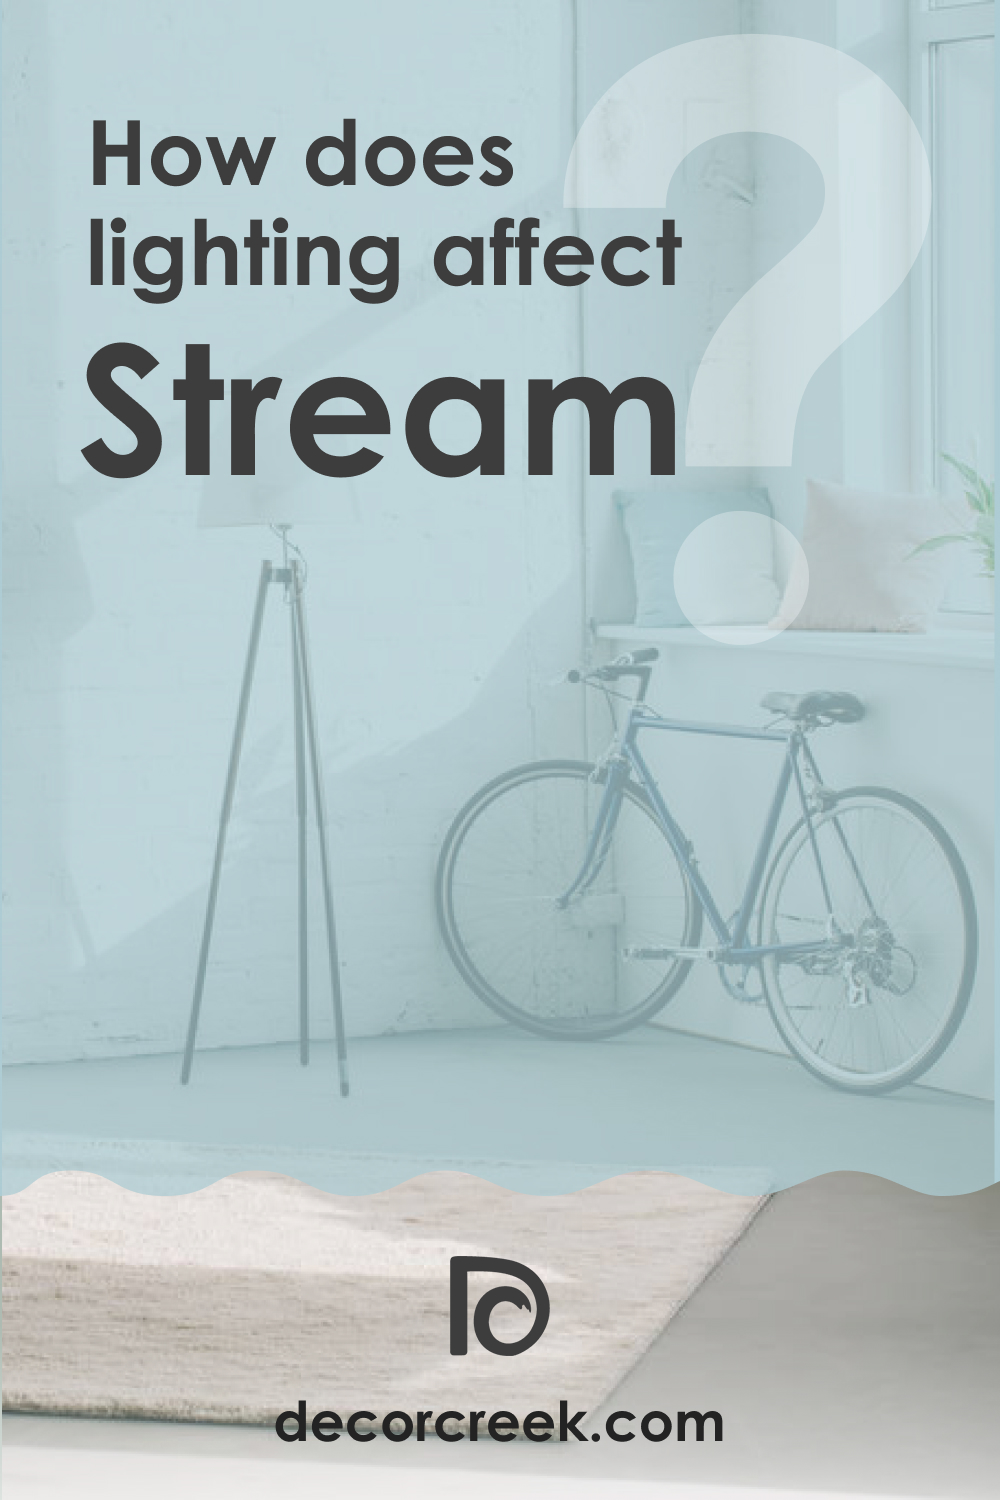 How Does Lighting Affect SW 6499 Stream?